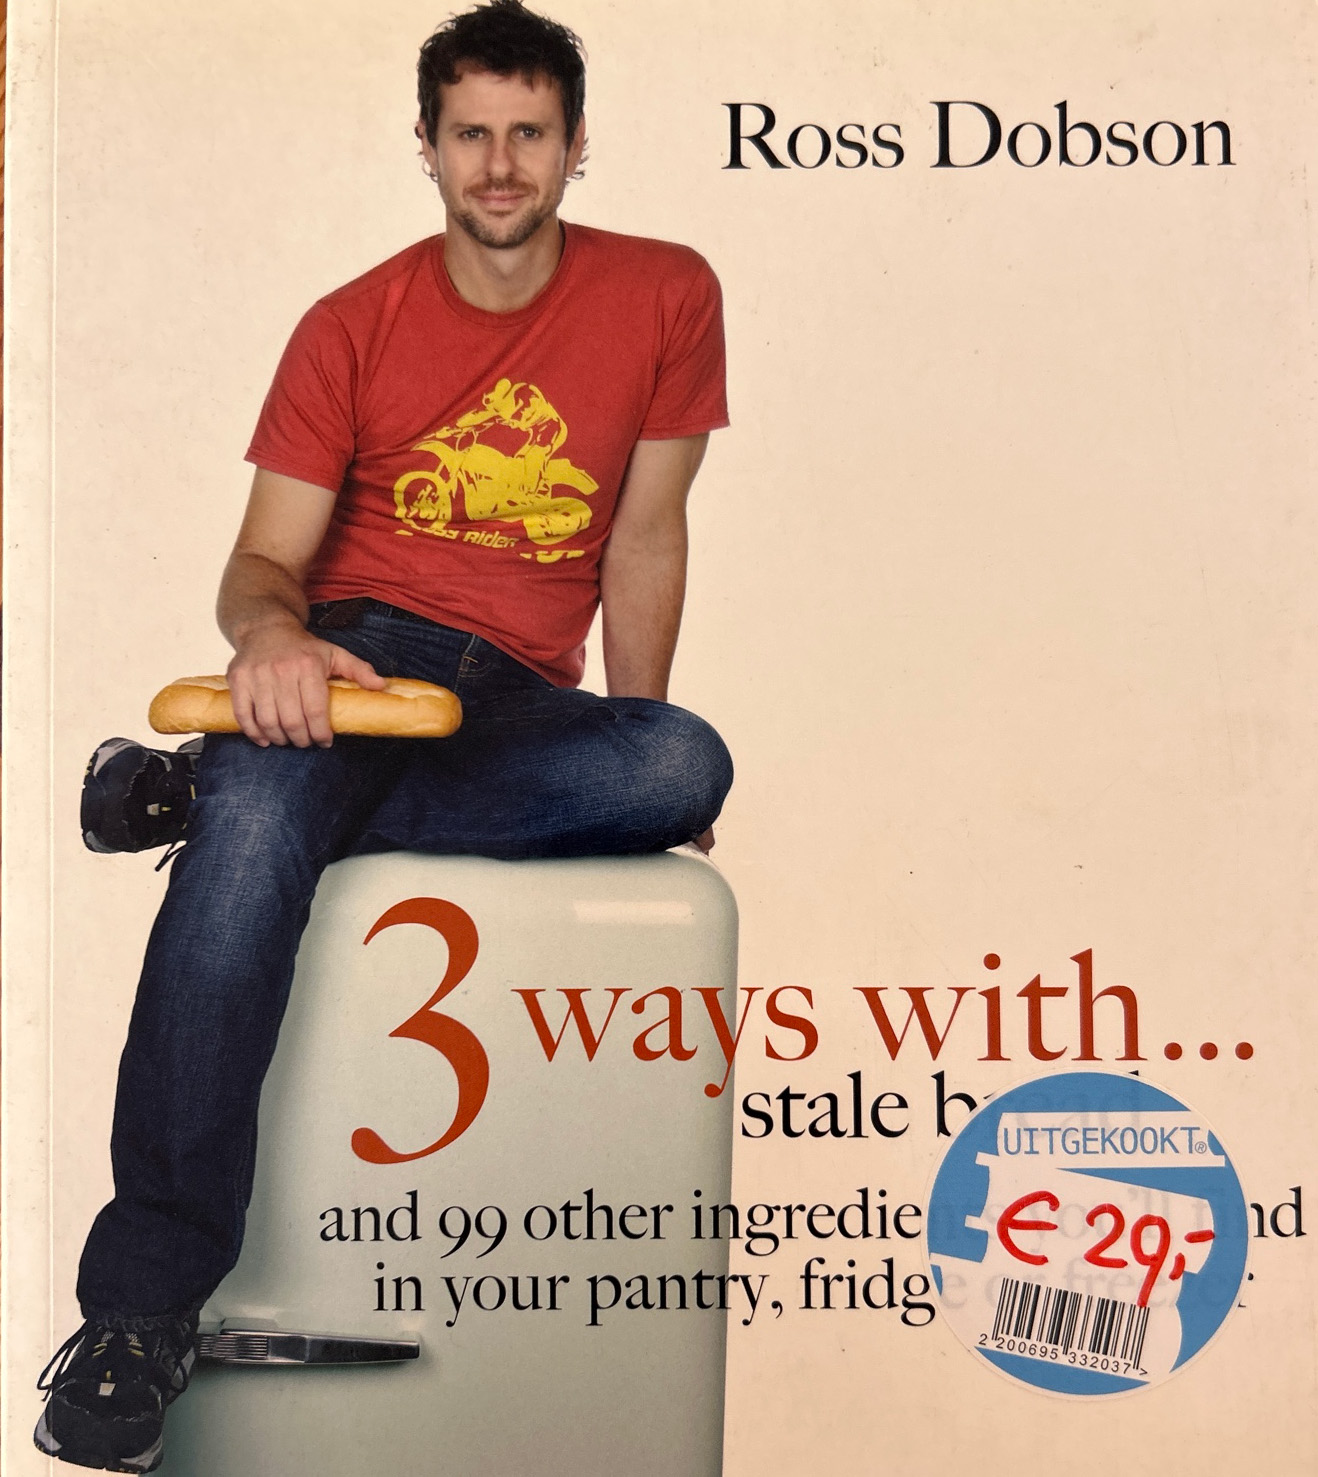 3 Ways with… – Ross Dobson